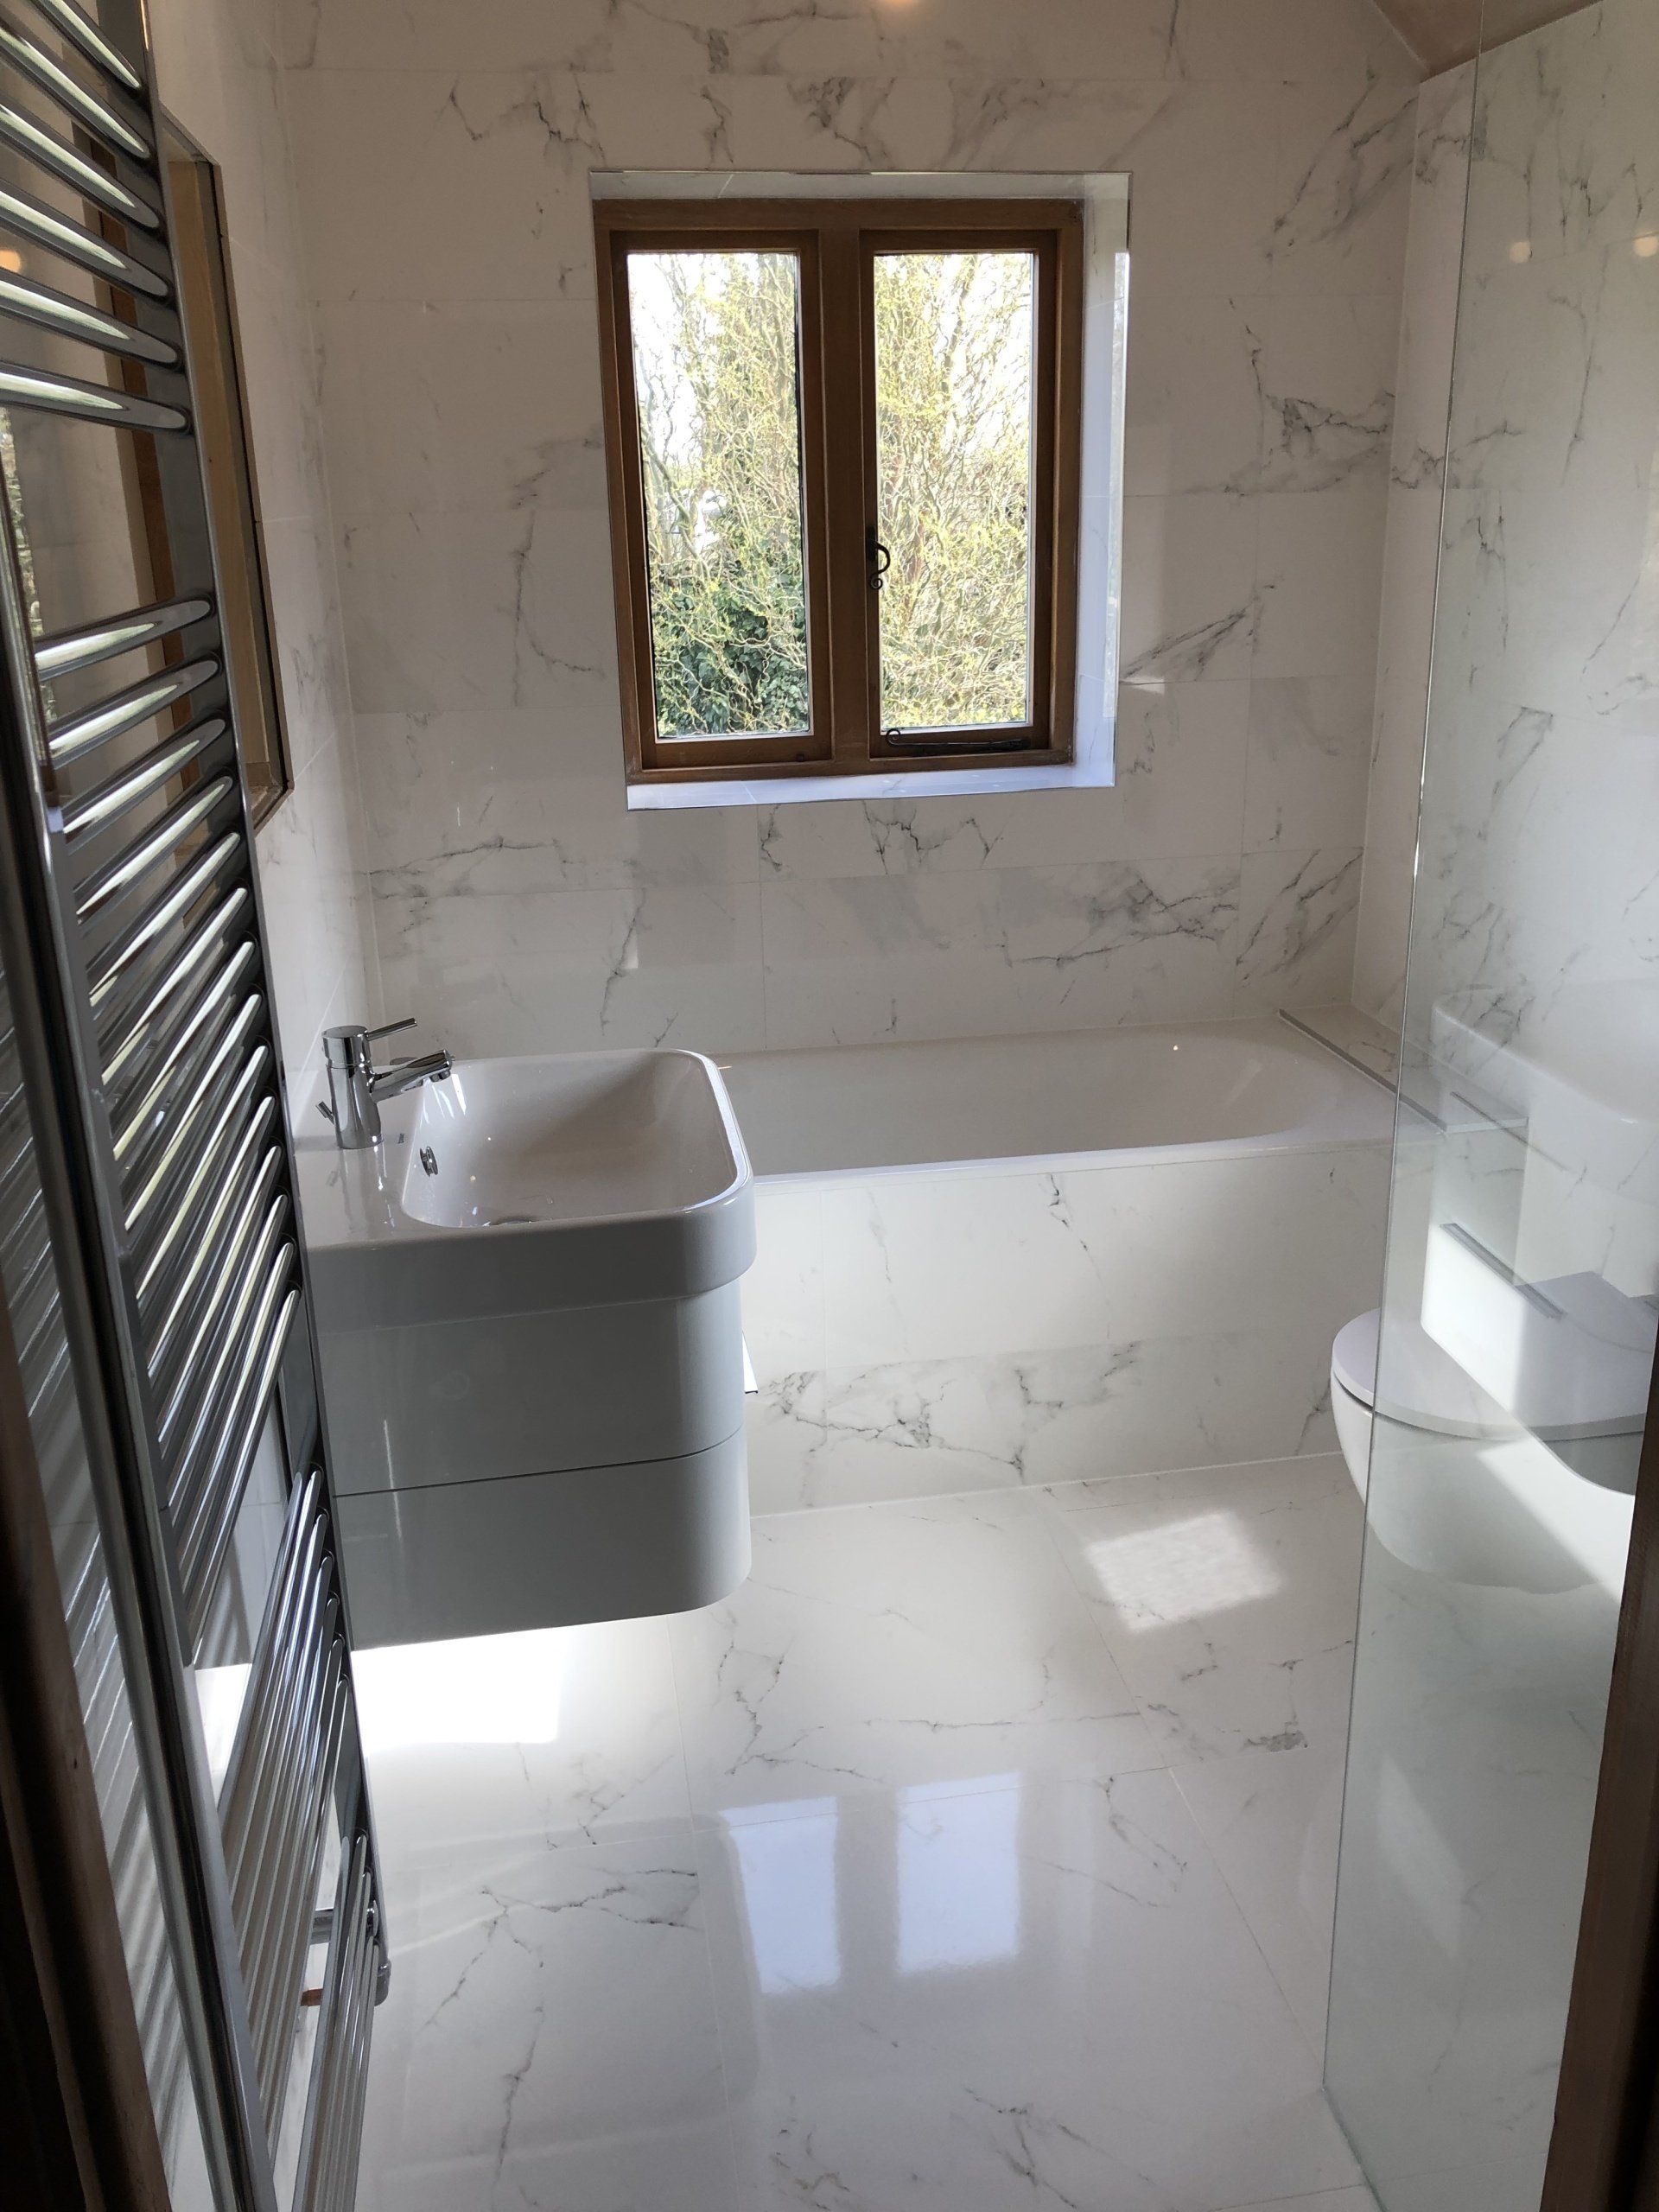 Please look below to find a complete transformation- we created a walk in shower room with beautiful white marble tiles with gloss white furniture.